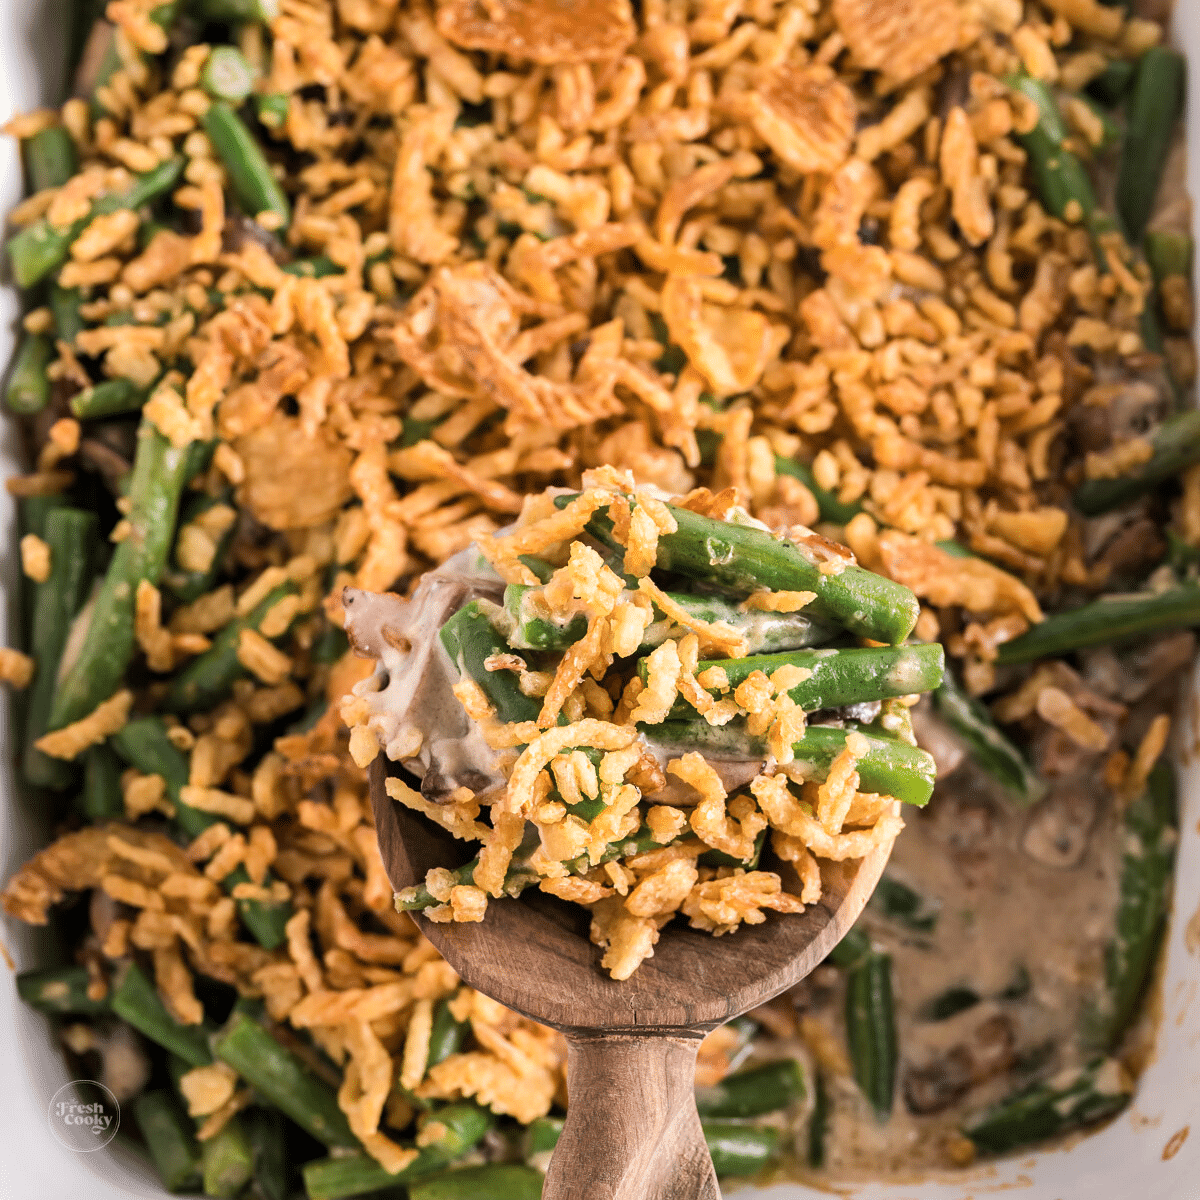 Creamy, ultimate green bean casserole with serving on wooden spoon.